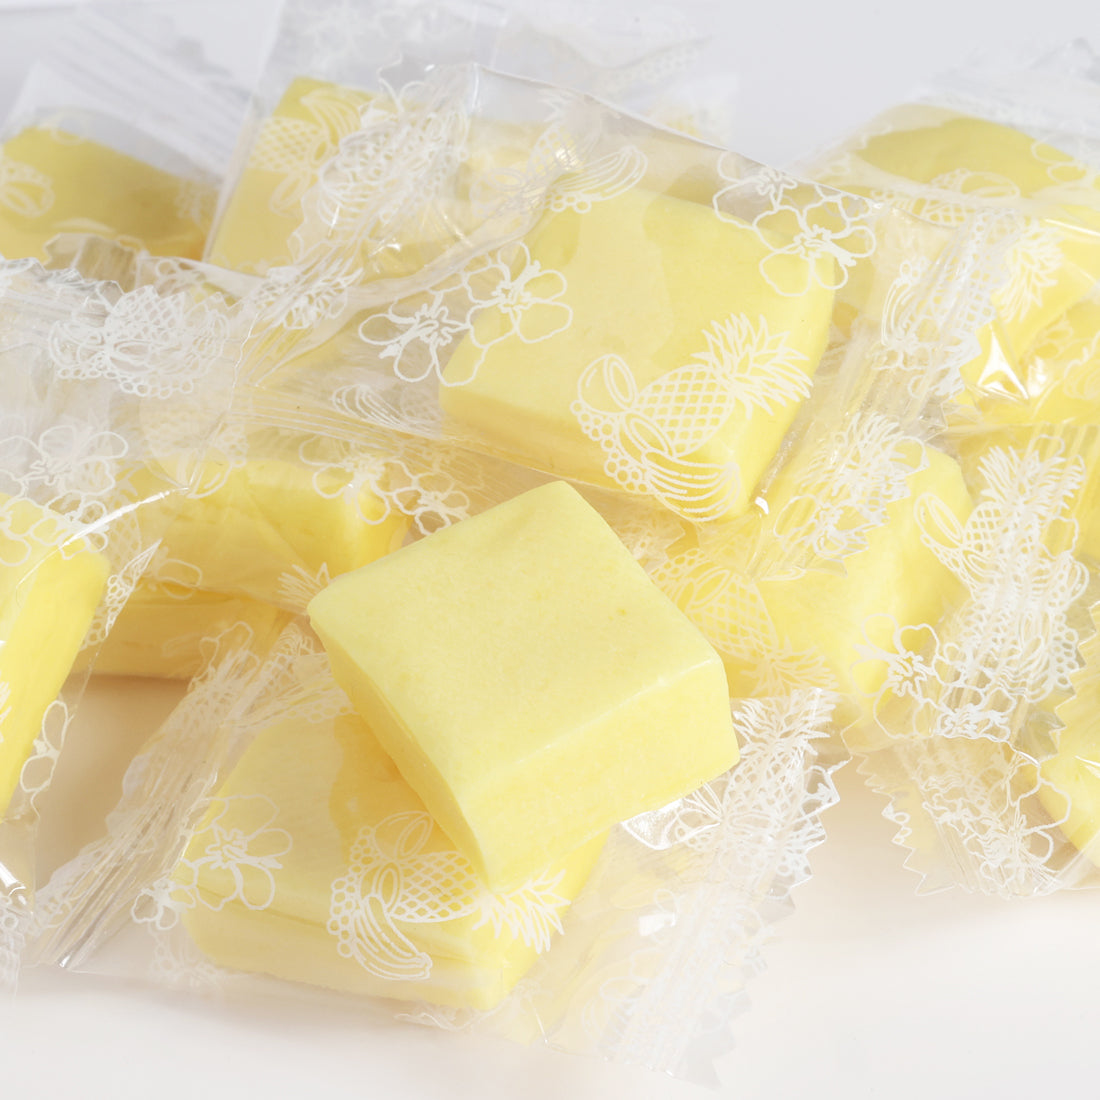 Chewy Candy (Pineapple)